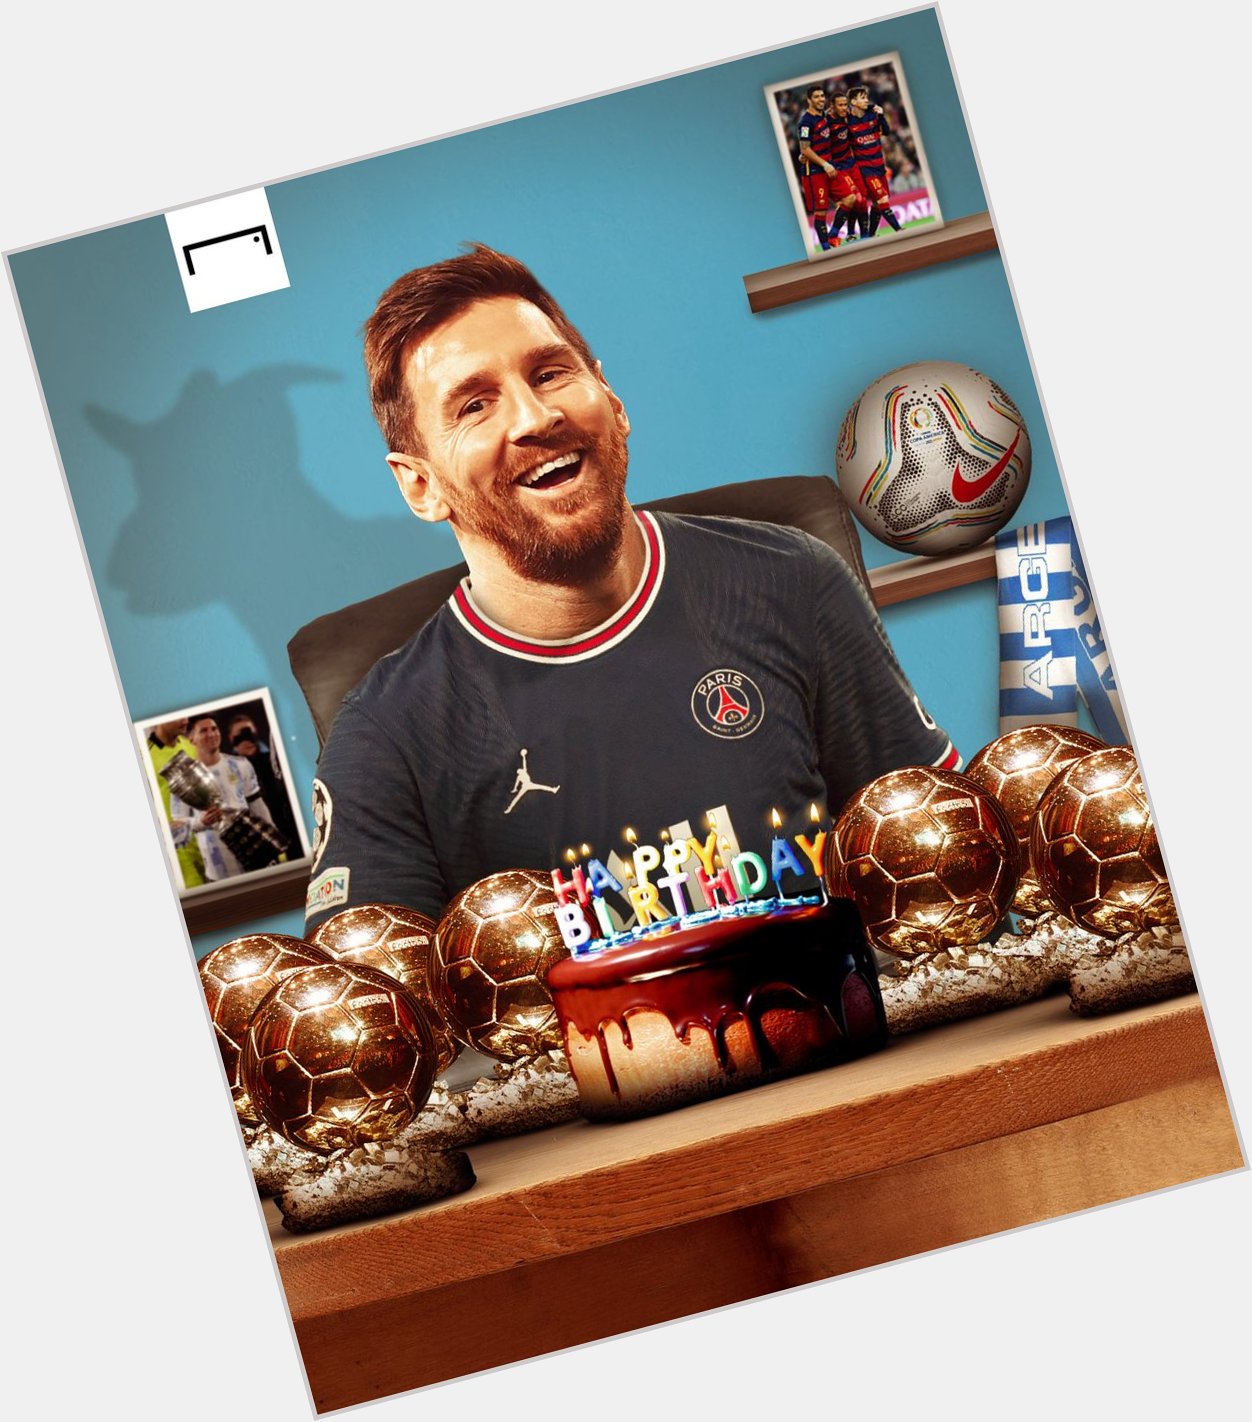 More trophies than his age!

Happy 35th birthday, Lionel Messi 